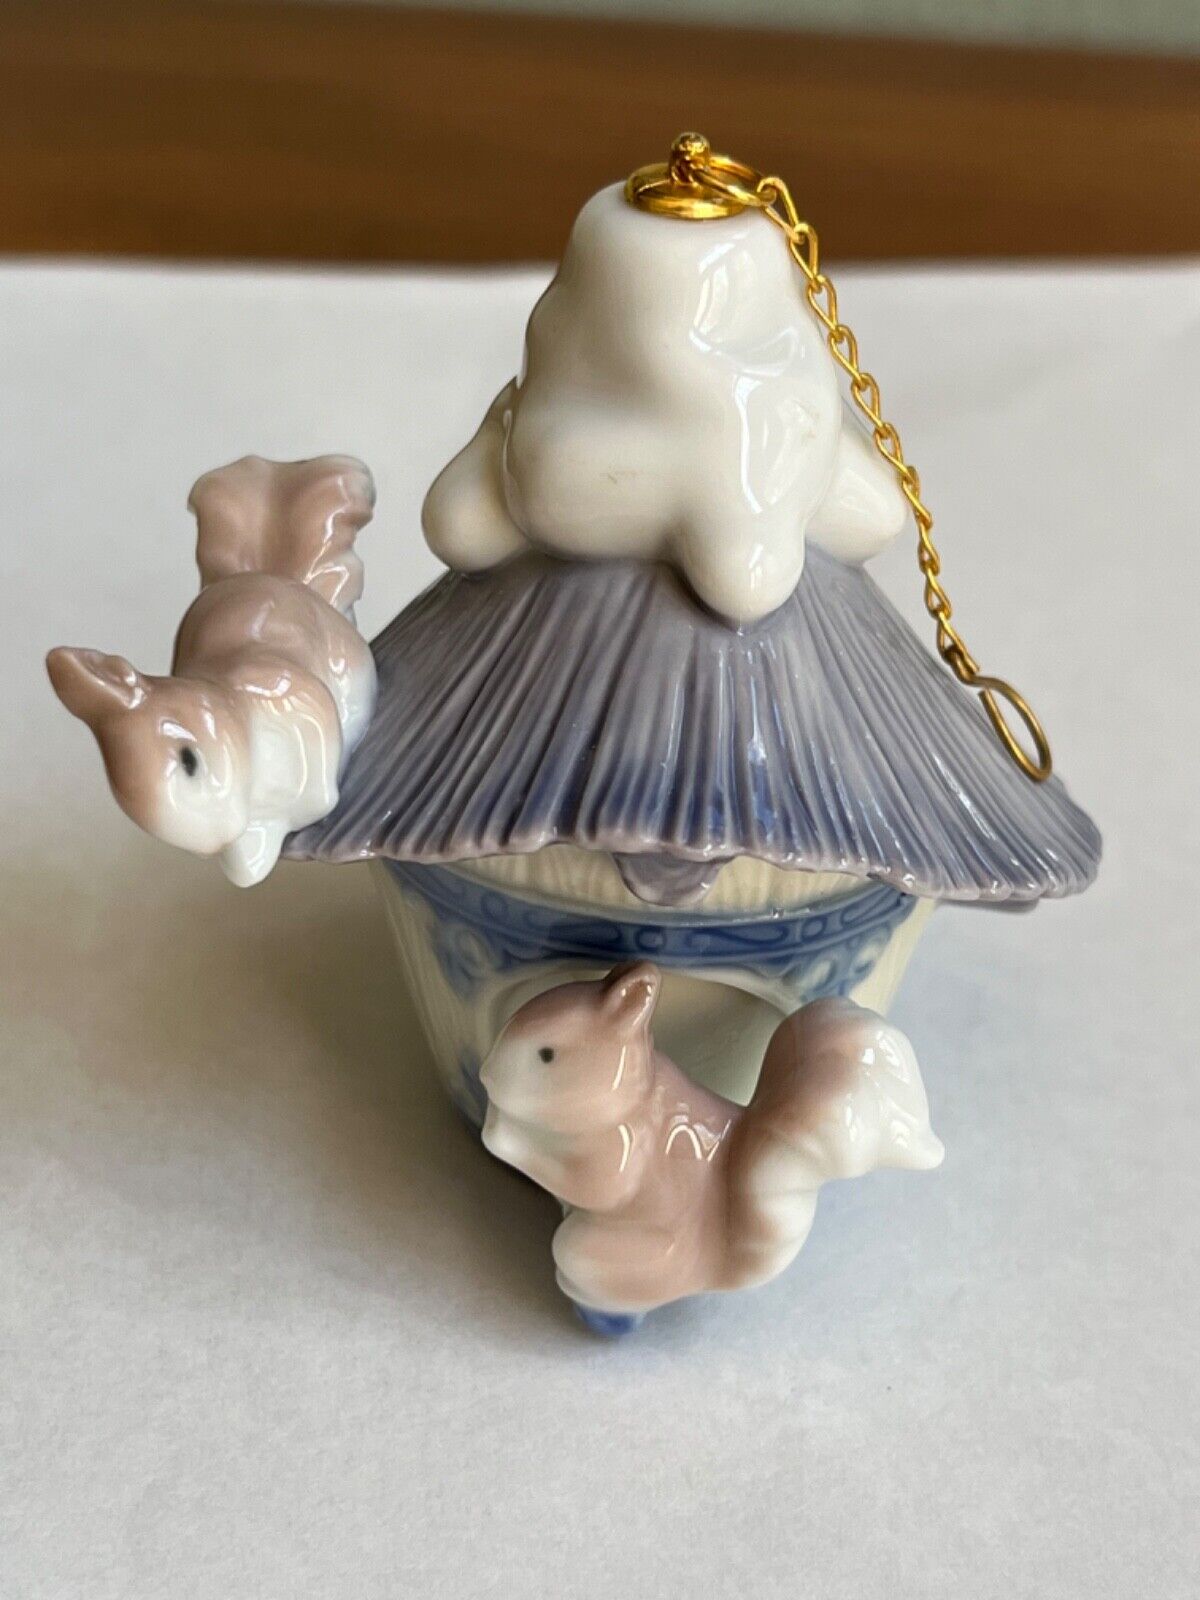 Lladro Our Winter Home Squirrels Ornament 6519? Very Gently Used NO BOX Vintage